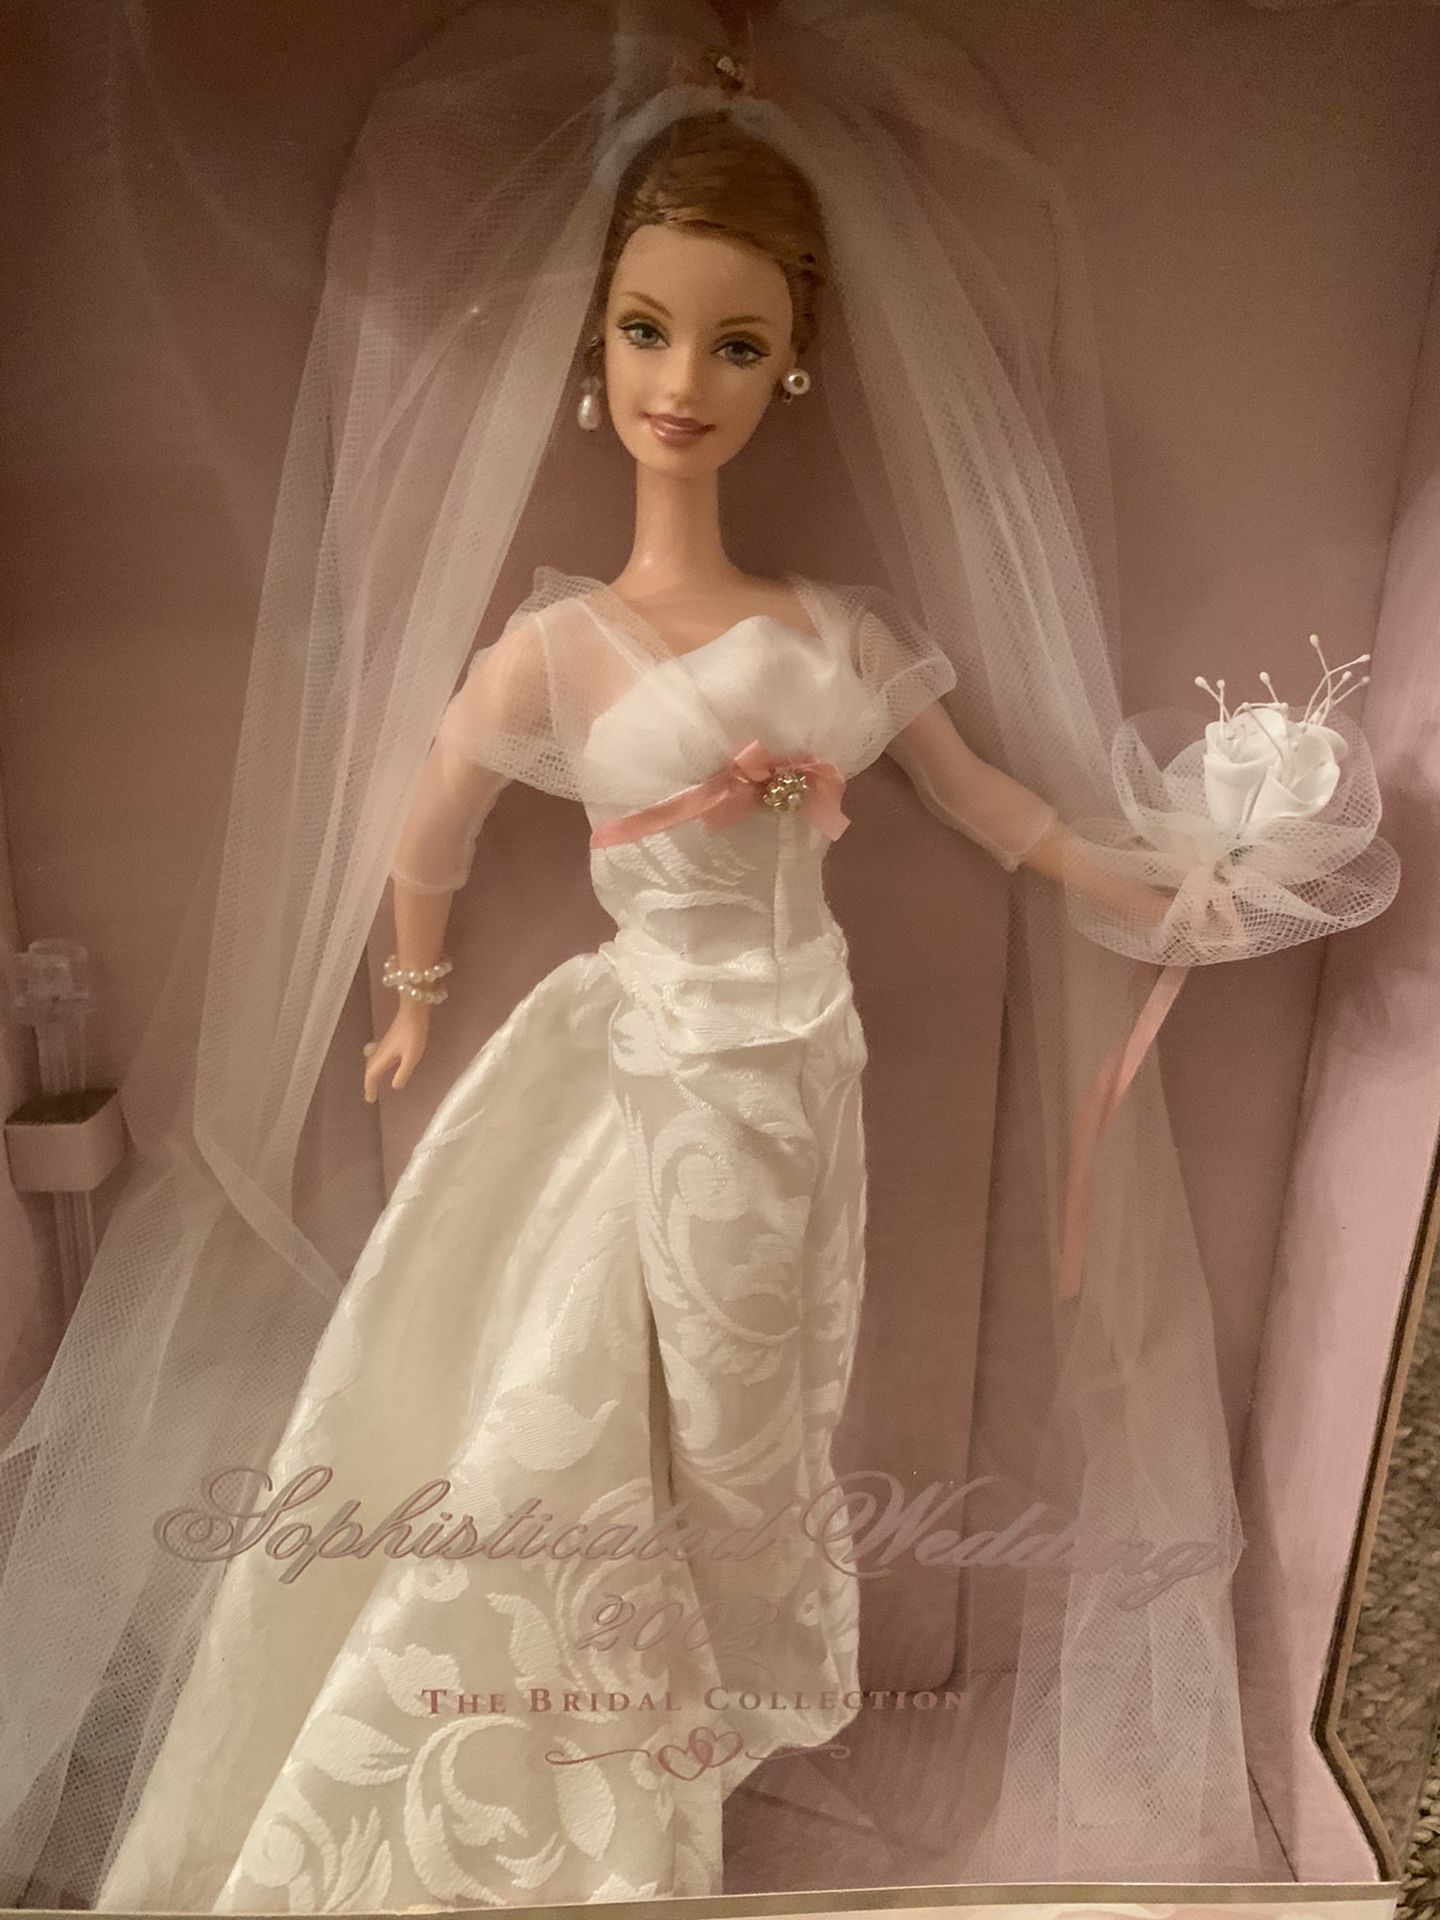 Sophisticated Wedding Bride Barbie Doll 2002 Third/Series Collector Edition NRFB